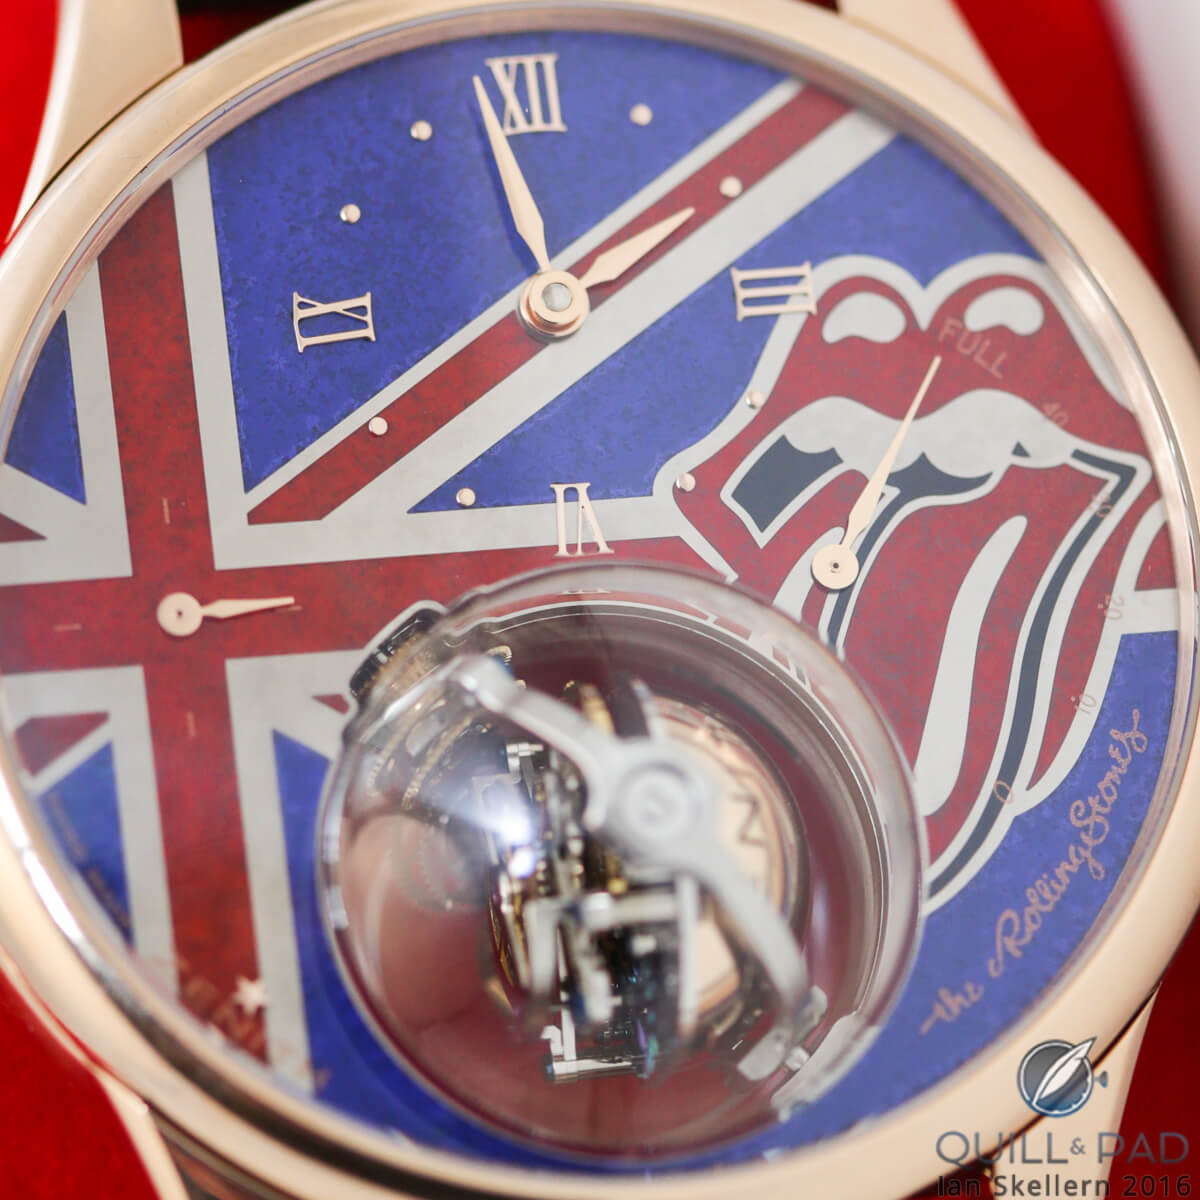 The colorful dial of the Zenith Christophe Colomb Tribute to The Rolling Stones